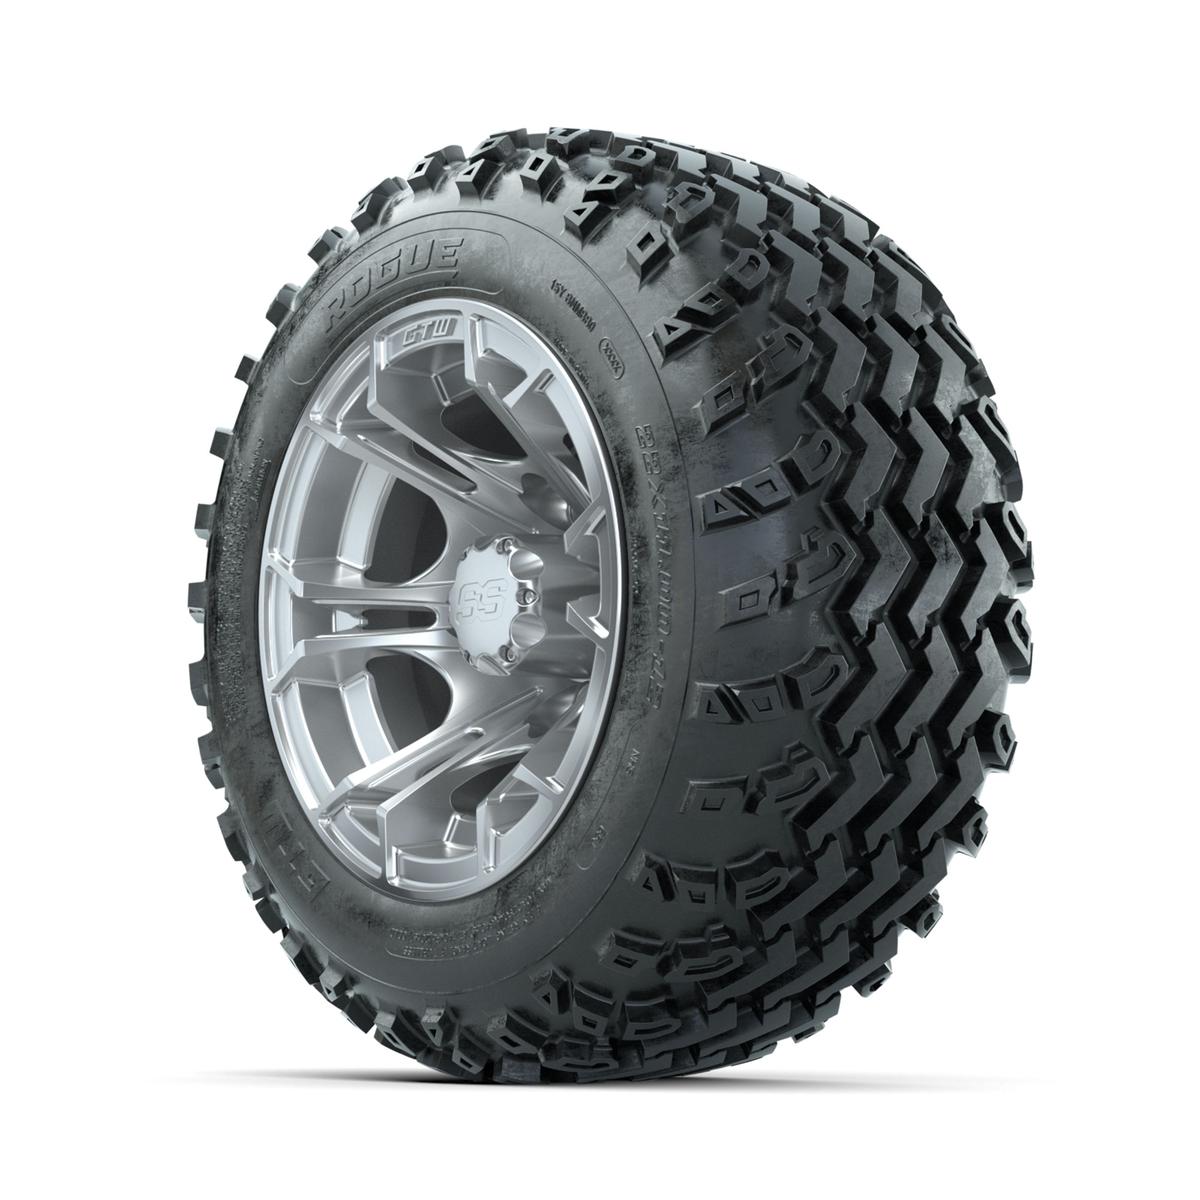 GTW Spyder Silver 12 in Wheels with 22x11.00-12 Rogue All Terrain Tires – Full Set